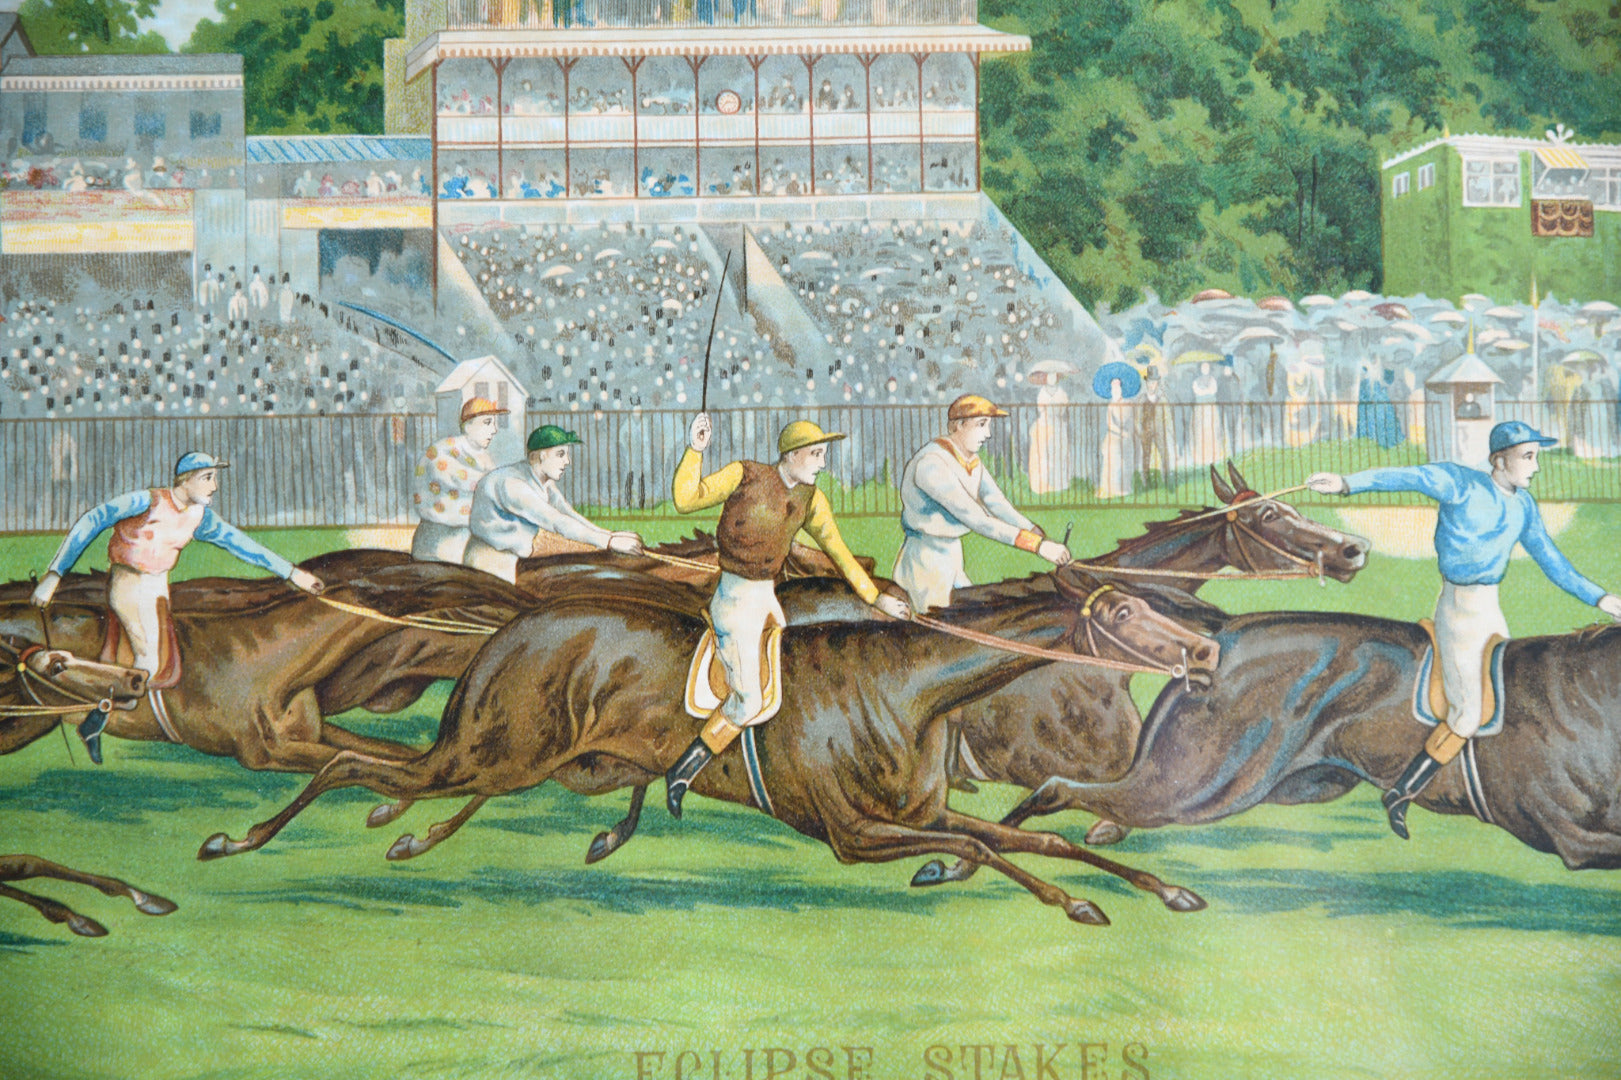 Eclipse Stakes - Racing Scene Print